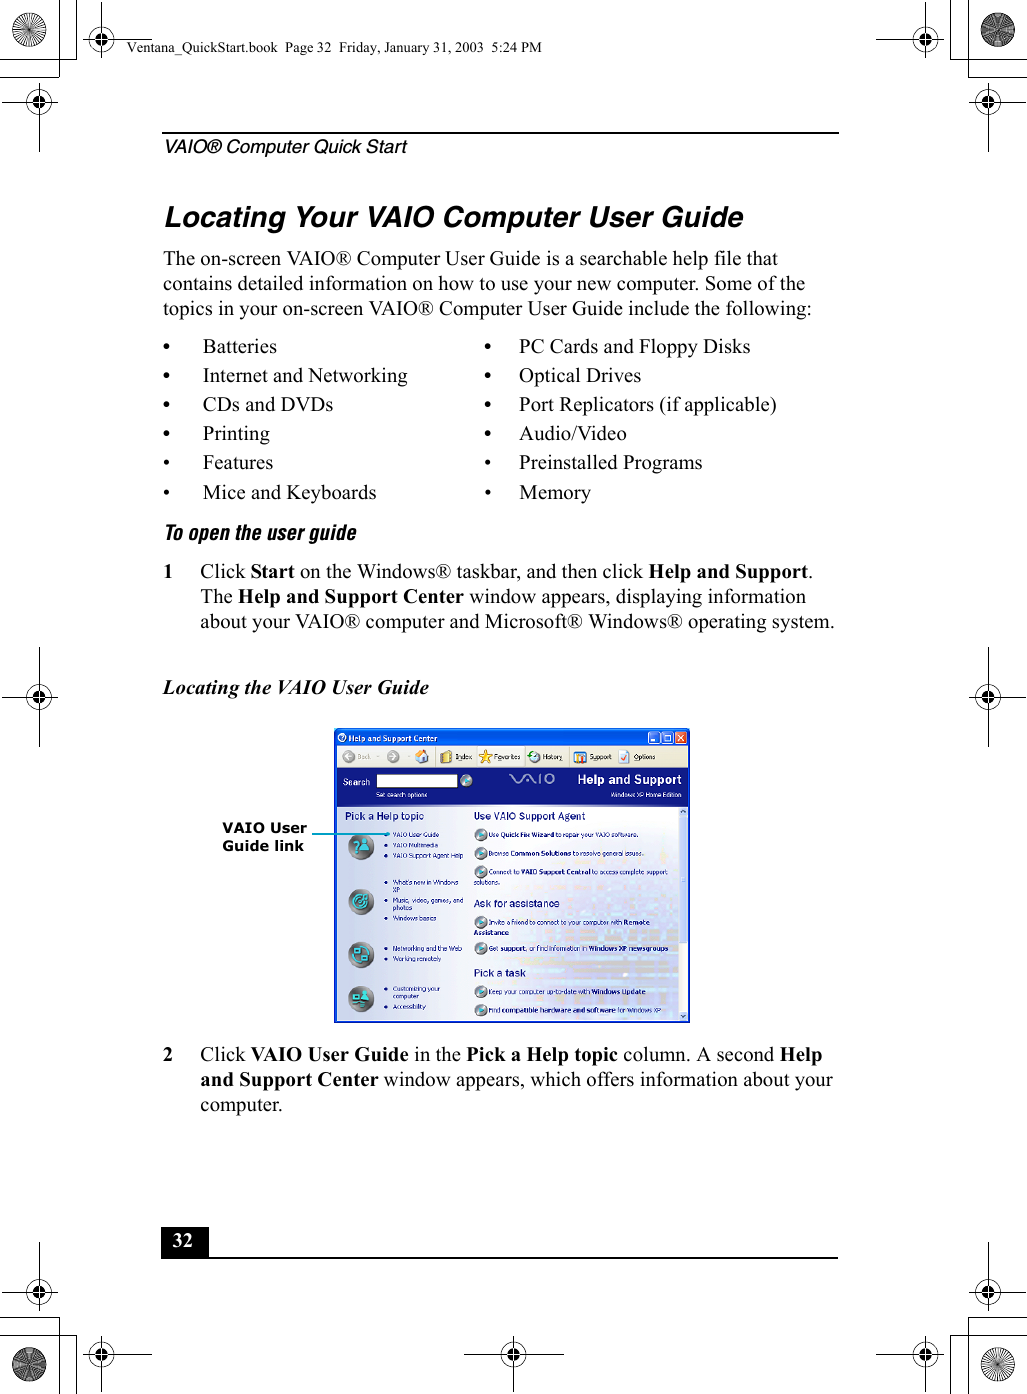 VAIO® Computer Quick Start32Locating Your VAIO Computer User GuideThe on-screen VAIO® Computer User Guide is a searchable help file that contains detailed information on how to use your new computer. Some of the topics in your on-screen VAIO® Computer User Guide include the following:To open the user guide 1Click Start on the Windows® taskbar, and then click Help and Support. The Help and Support Center window appears, displaying information about your VAIO® computer and Microsoft® Windows® operating system.2Click VAIO User Guide in the Pick a Help topic column. A second Help and Support Center window appears, which offers information about your computer.•Batteries •PC Cards and Floppy Disks•Internet and Networking •Optical Drives•CDs and DVDs •Port Replicators (if applicable)•Printing •Audio/Video• Features • Preinstalled Programs• Mice and Keyboards • MemoryLocating the VAIO User Guide VAIO UserGuide linkVentana_QuickStart.book  Page 32  Friday, January 31, 2003  5:24 PM